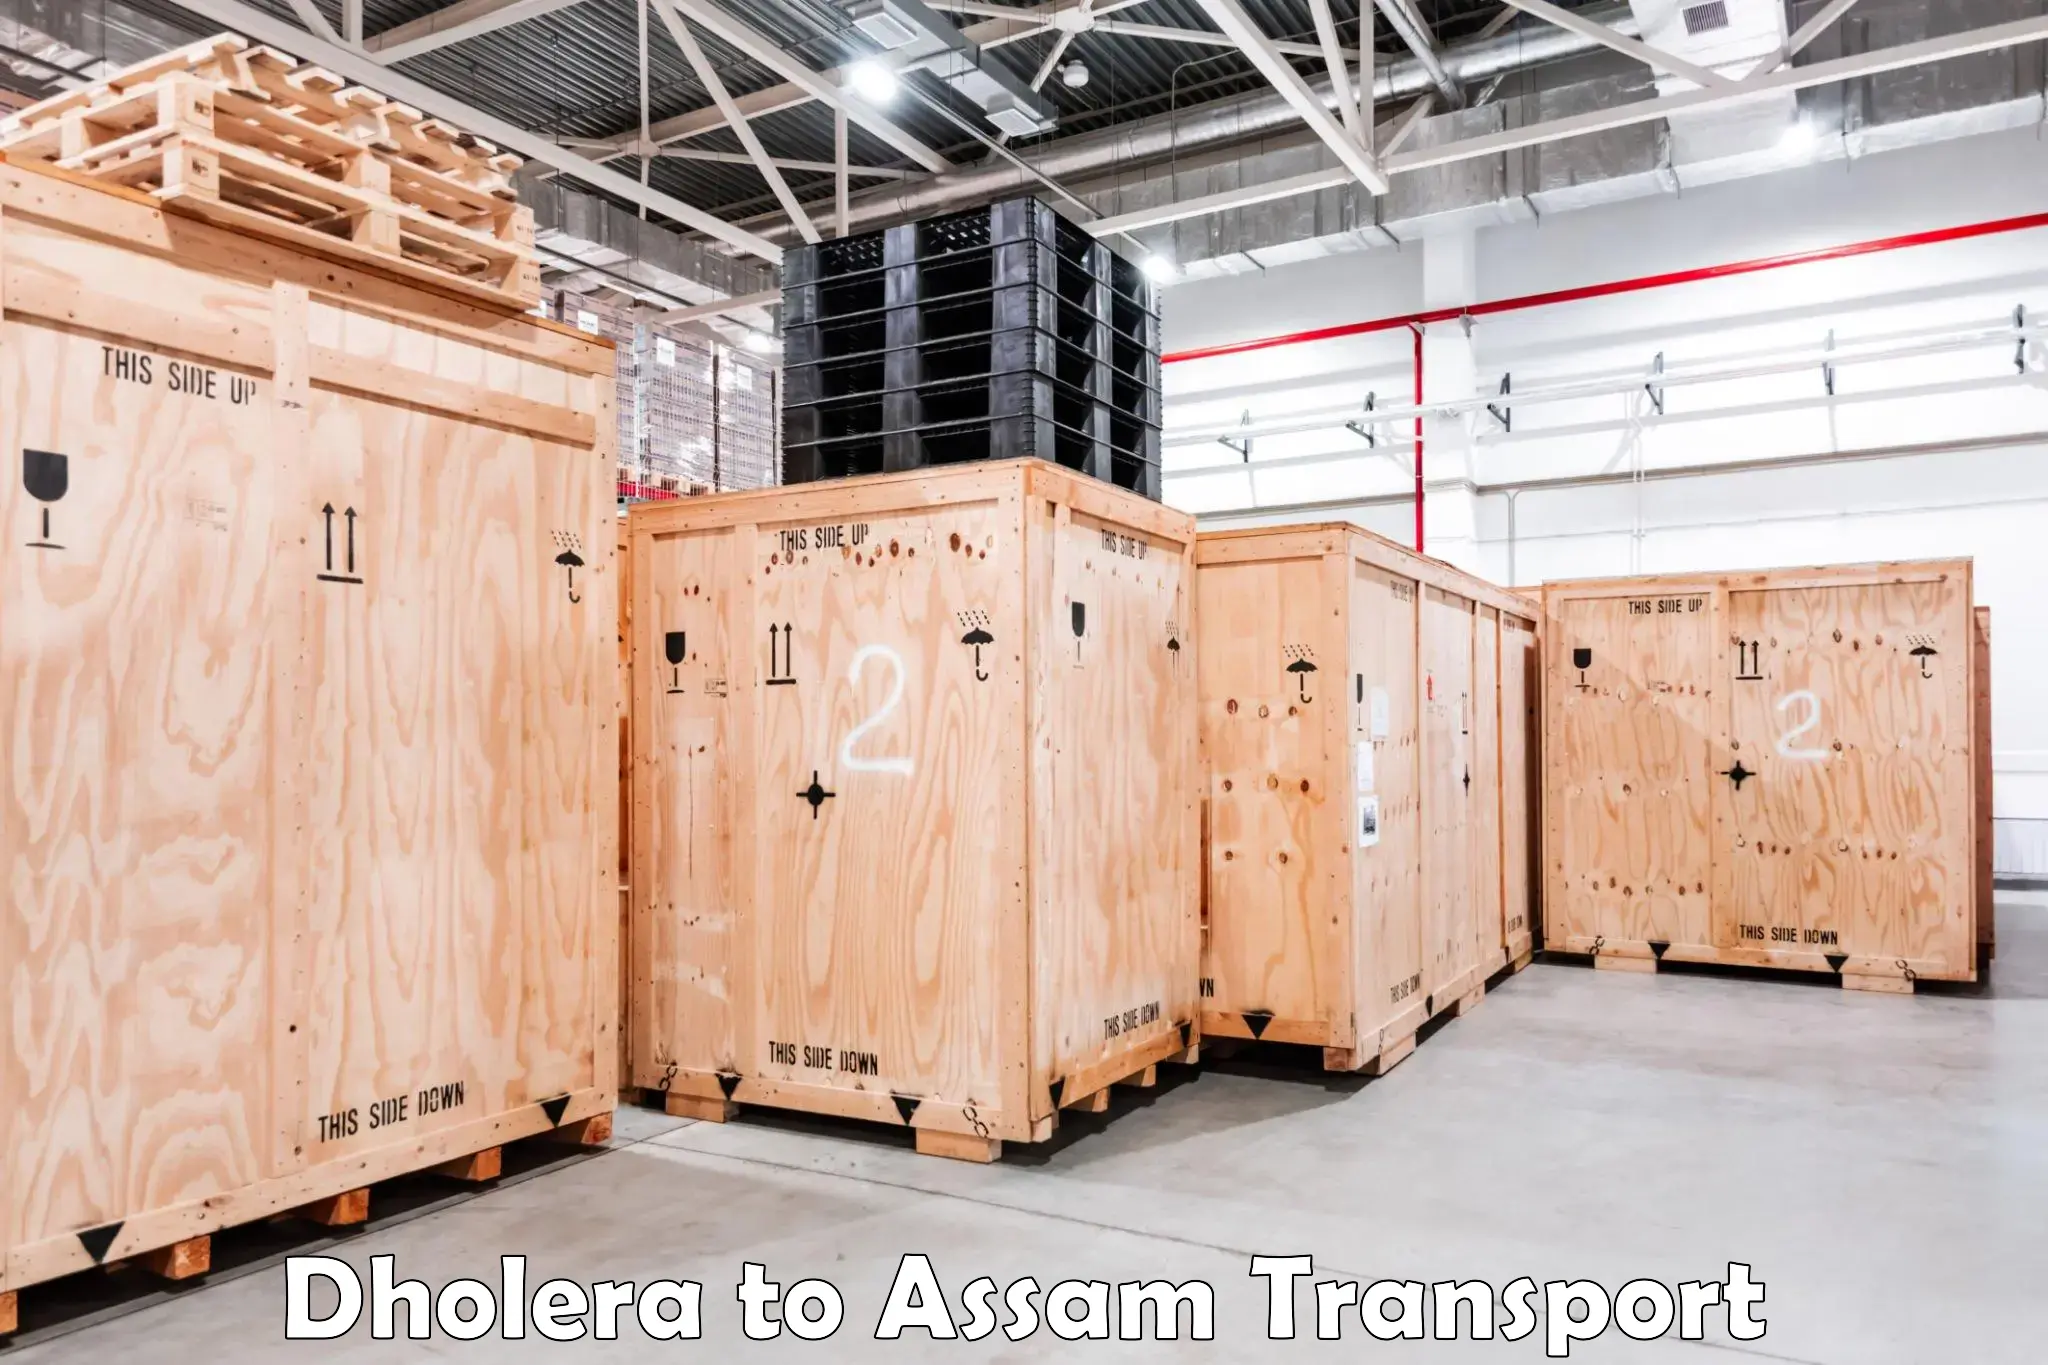 Delivery service Dholera to Guwahati